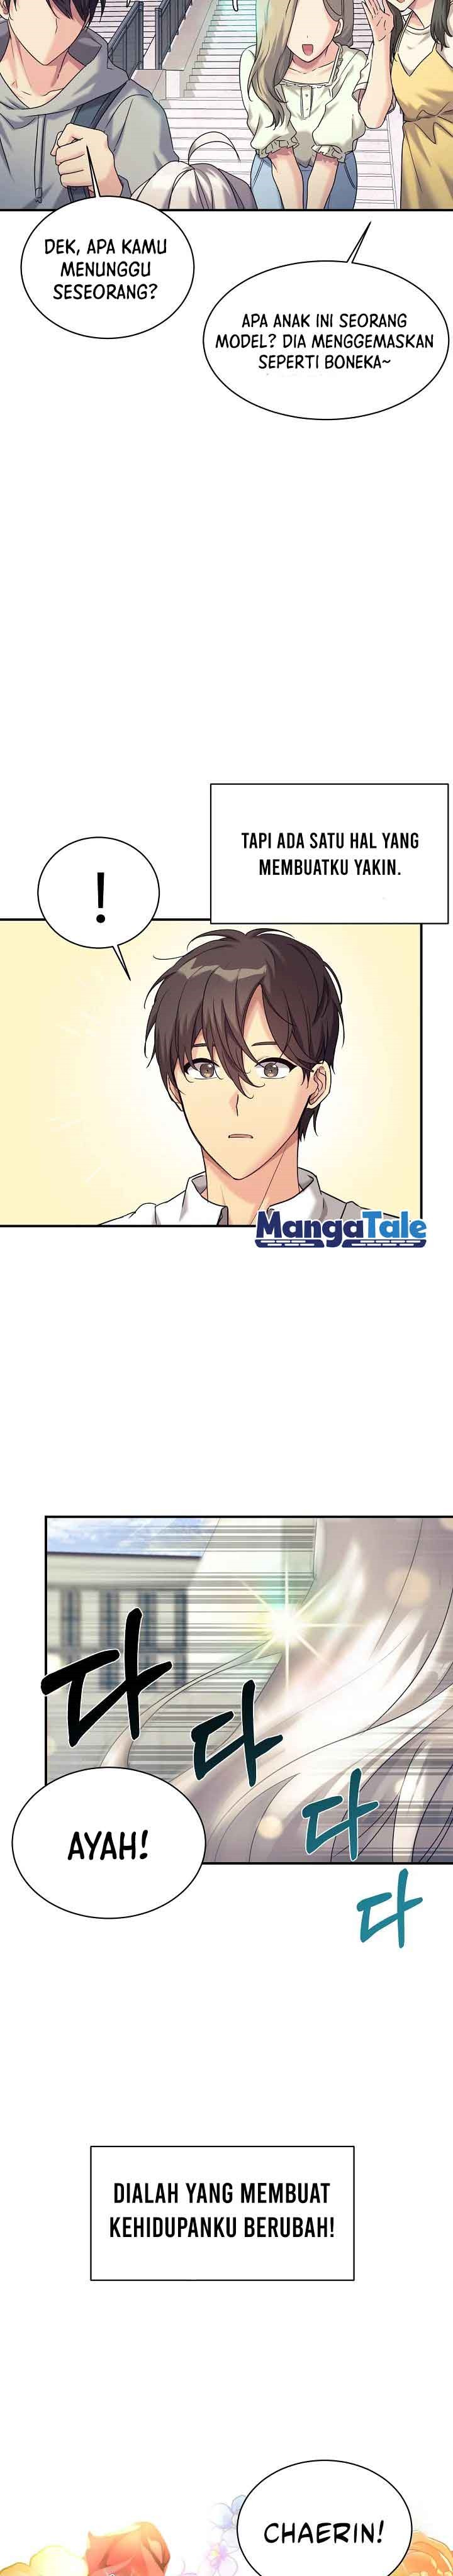 Spoiler Manhwa My Daughter Is a Dragon! 3